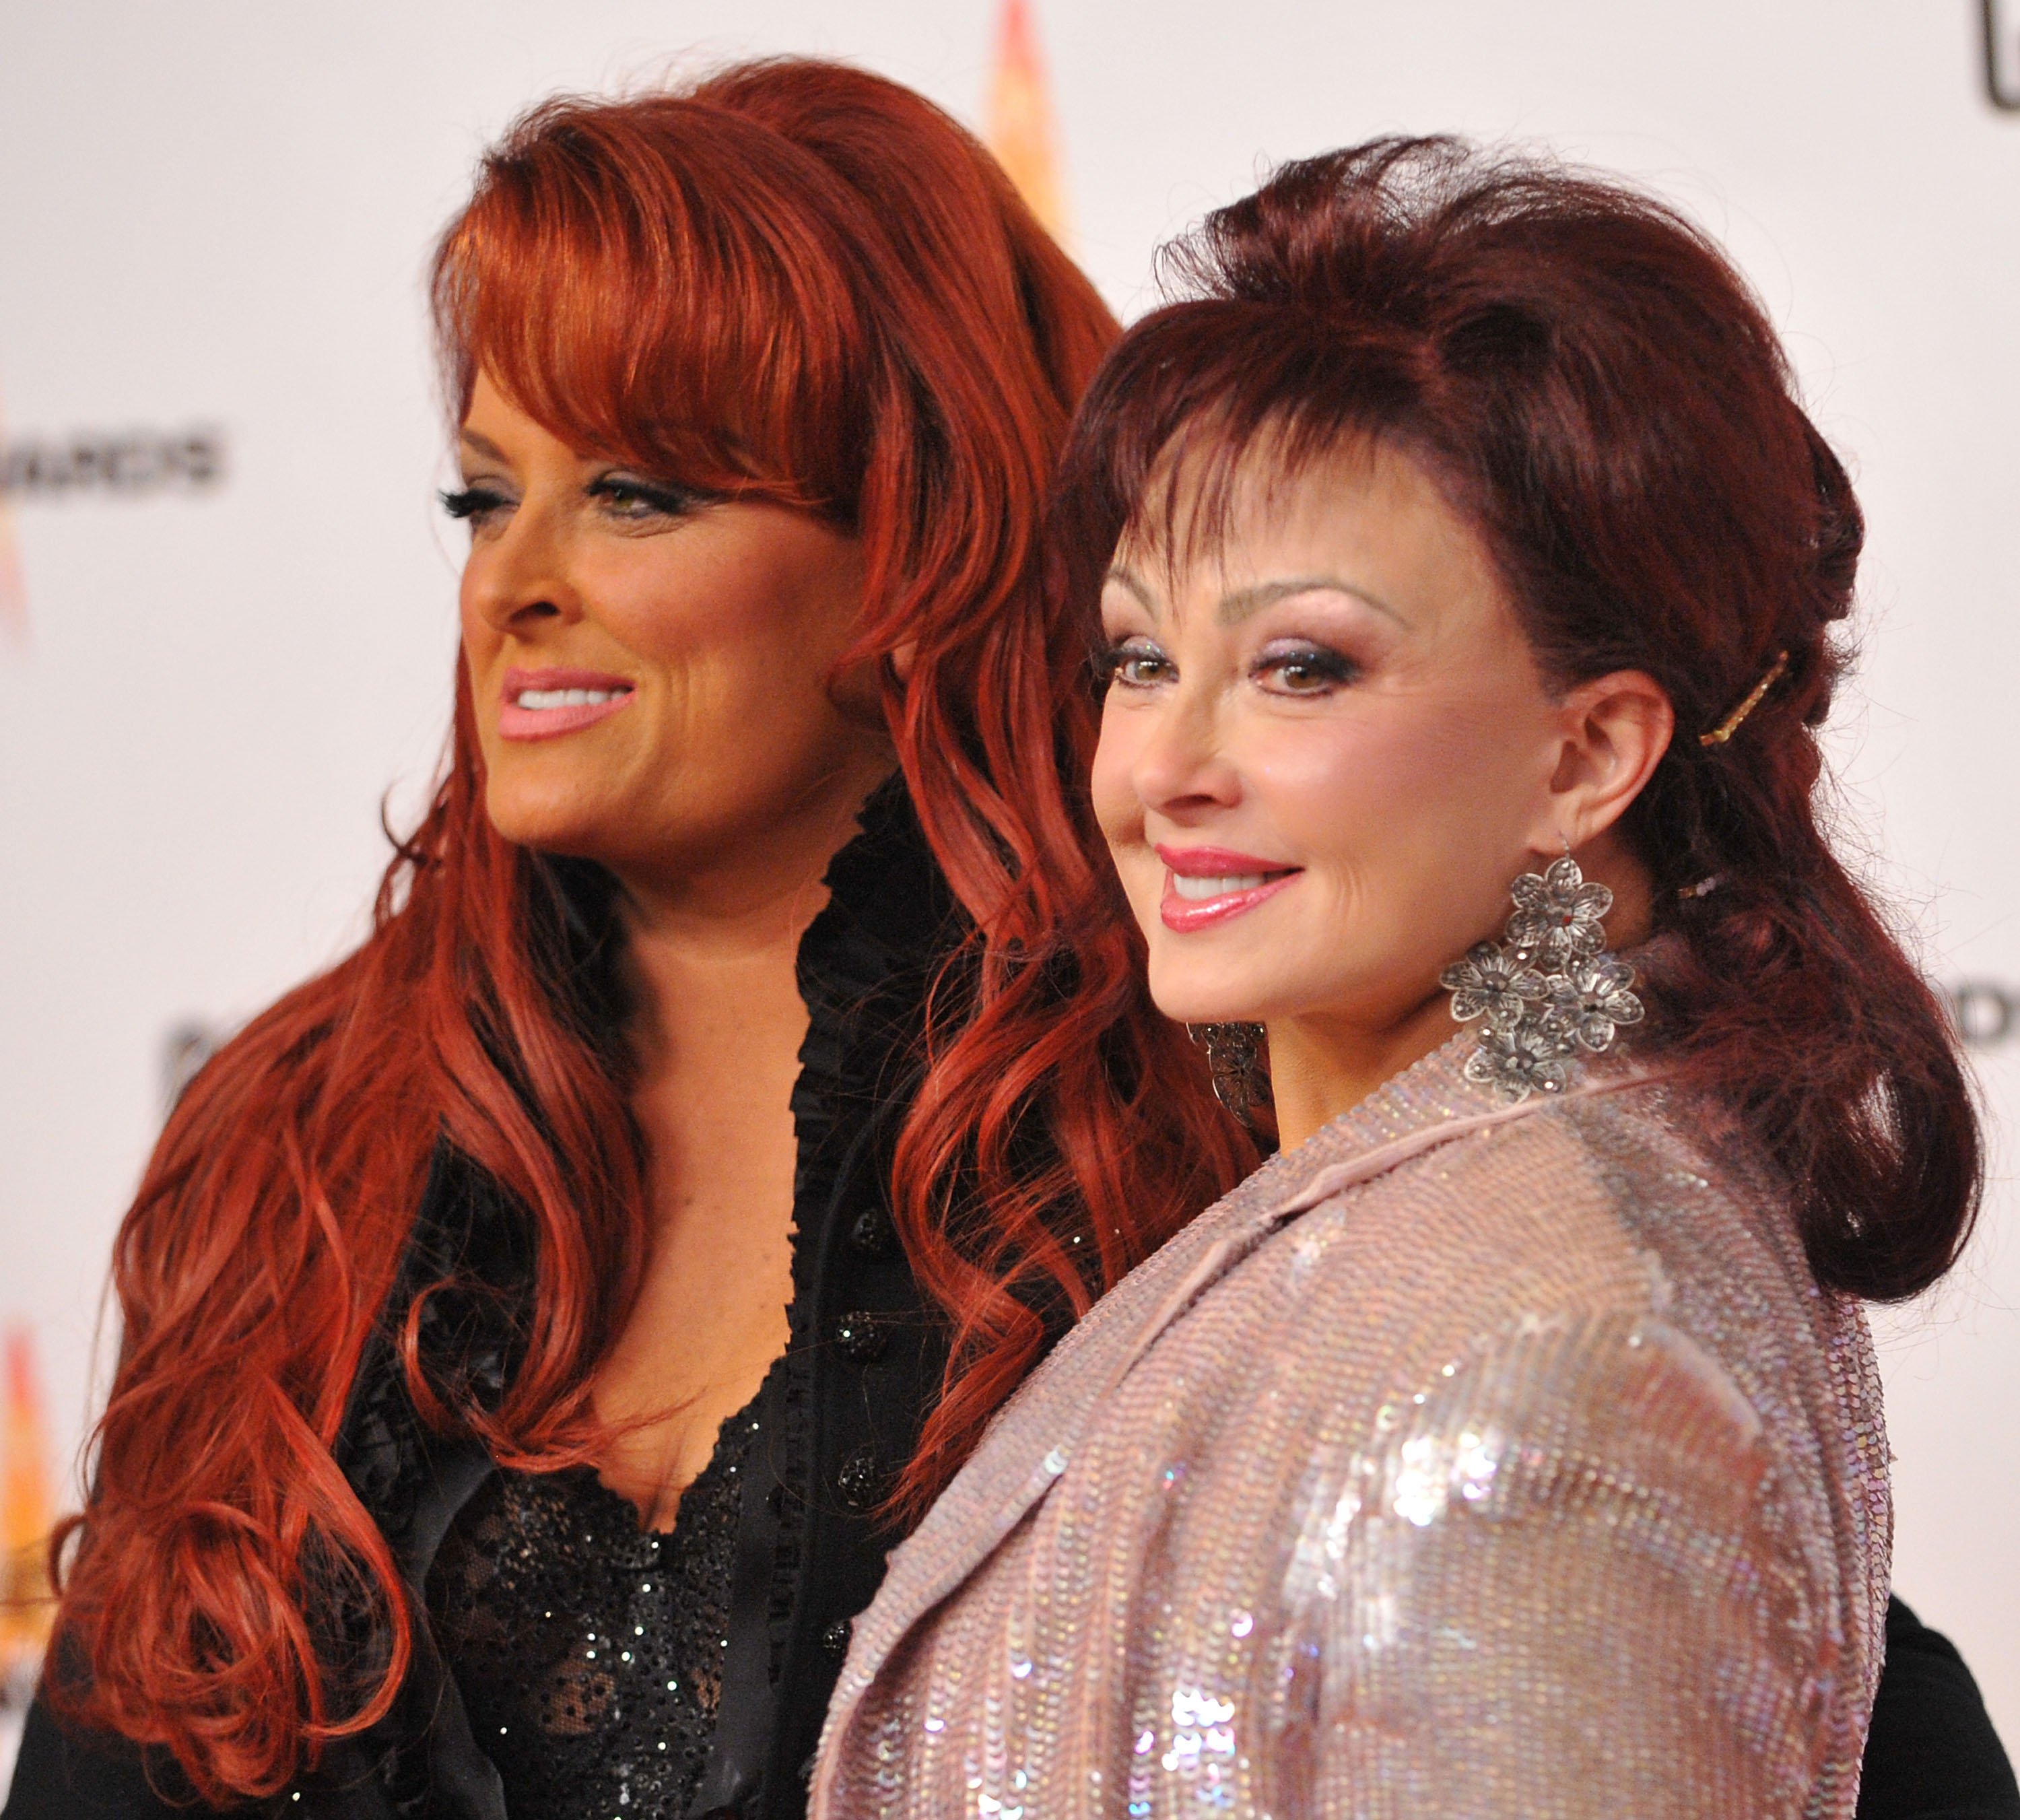 Singer Wynonna Judd and mom singer Naomi Judd of The Judds arrive at the 43rd Annual CMA Awards at the Sommet Center on November 11, 2009, in Nashville, Tennessee. | Source: Getty Images